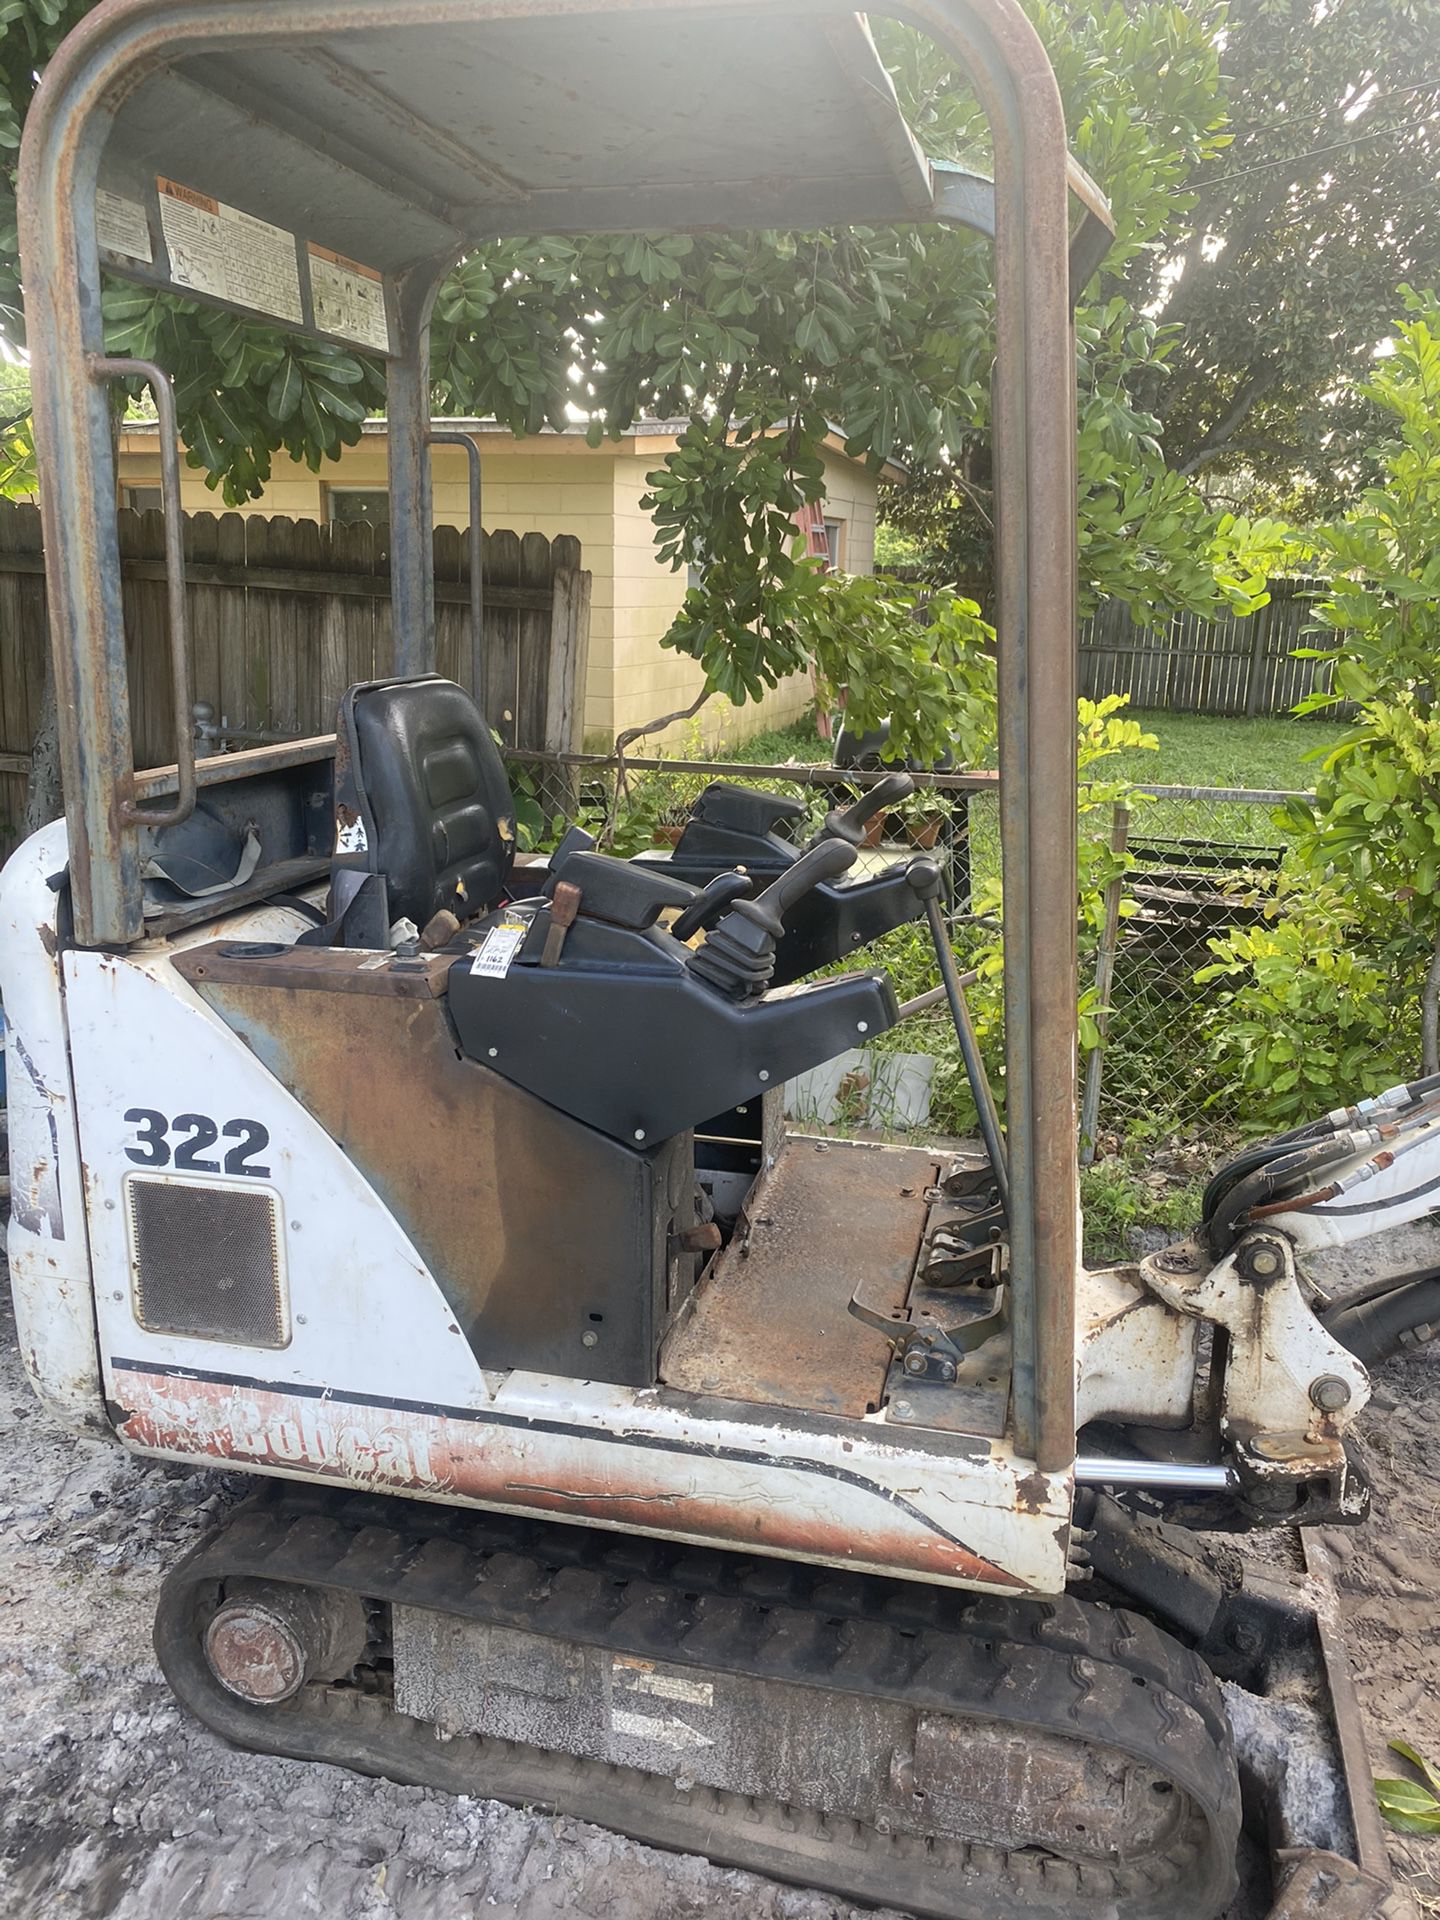 Bobcat 322 kubota diesel ready to work 220 hours very good all its maintenance no leaks everything works in perfect condition great machine to work